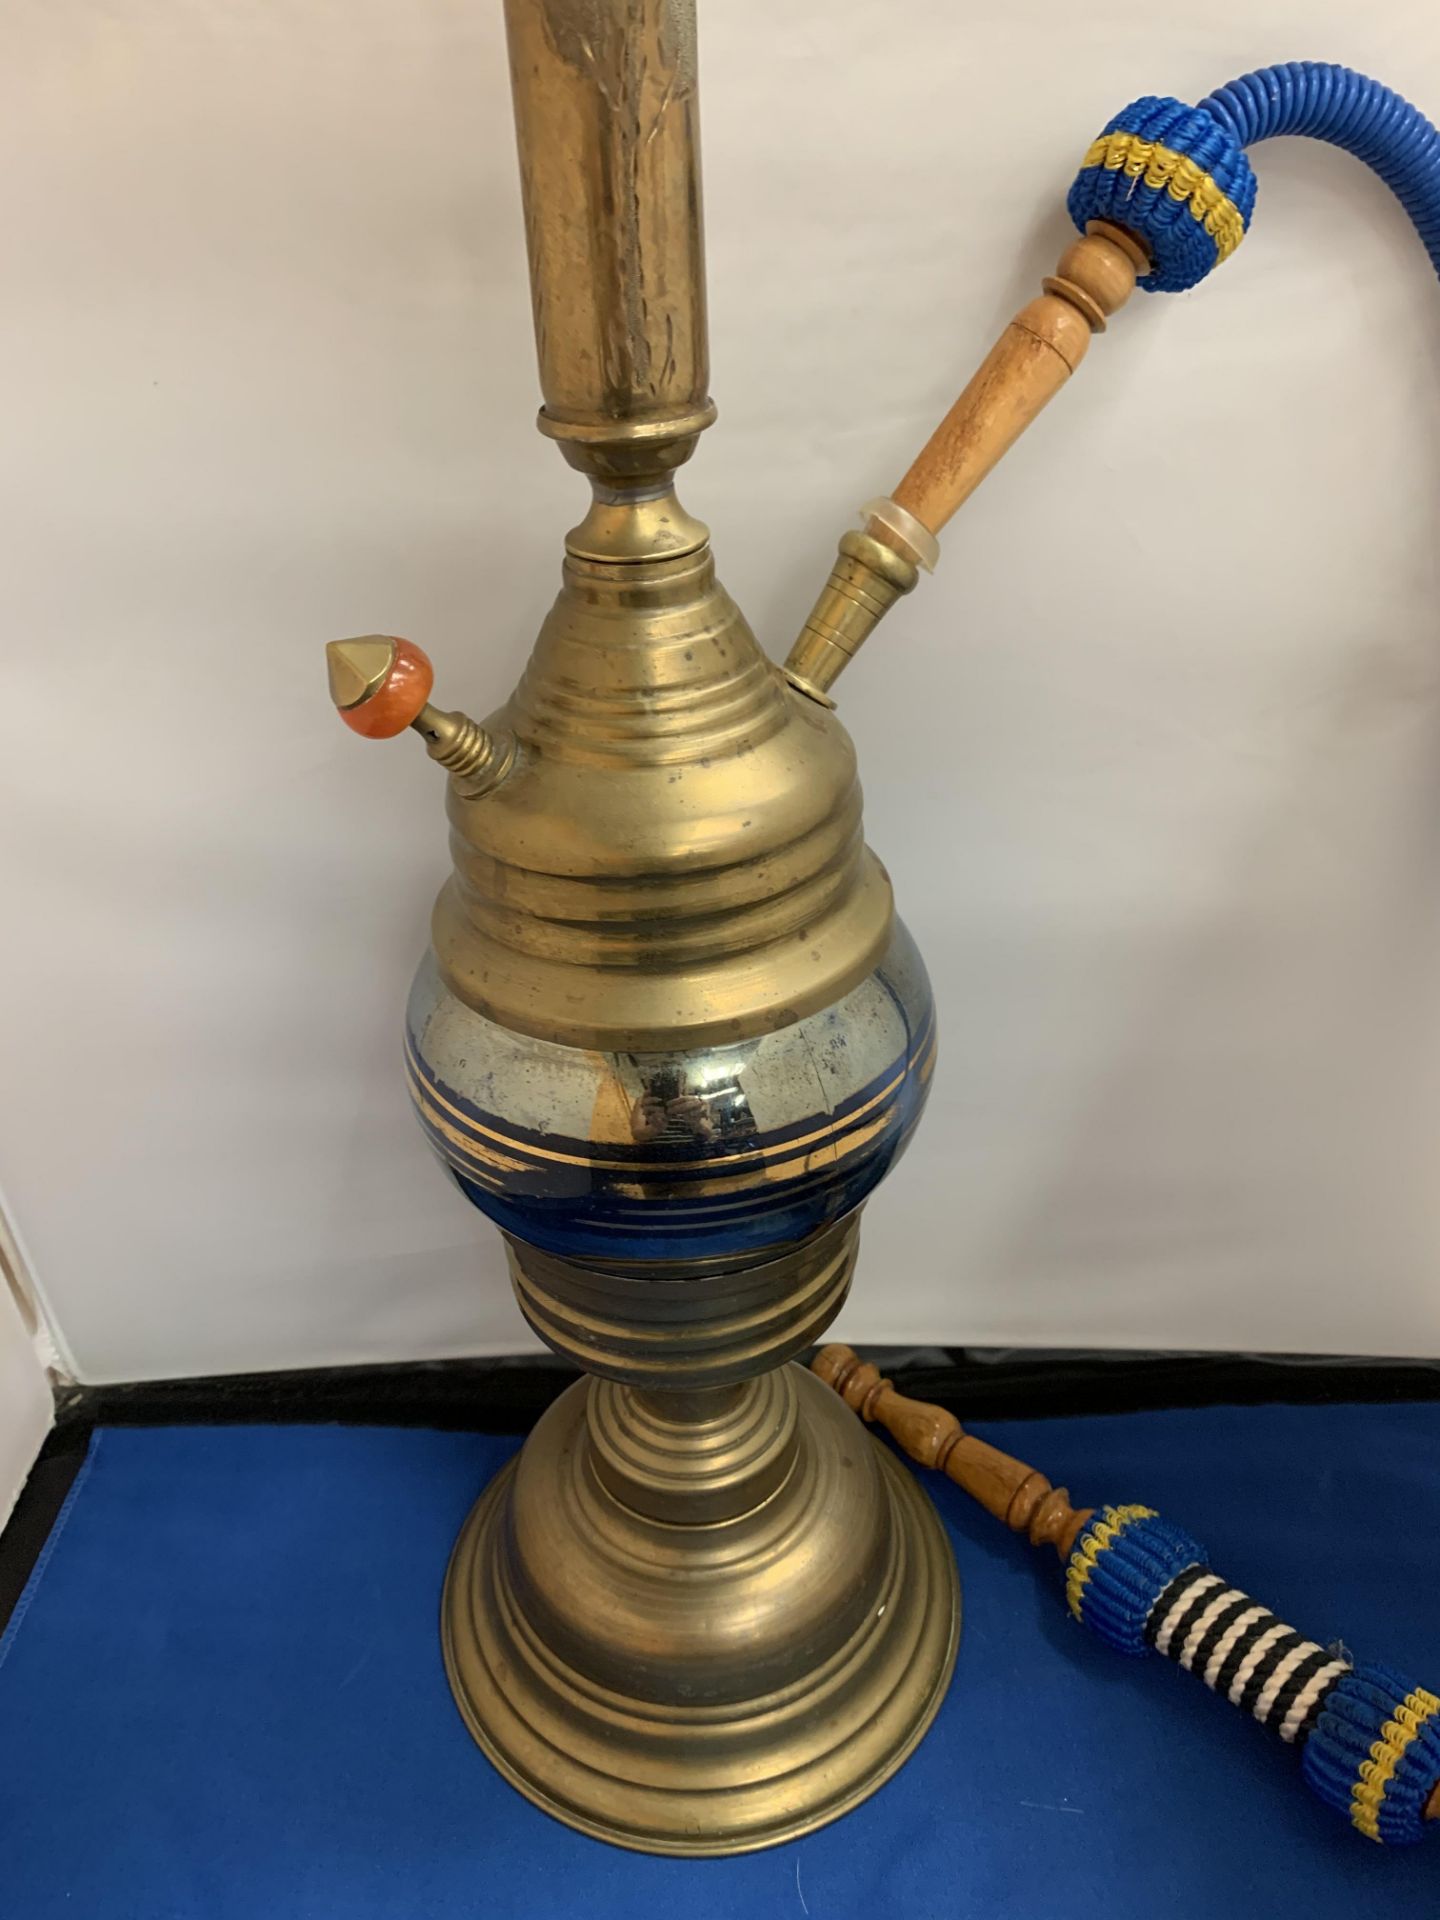 A BRASS SHISHA PIPE WITH A BLUE BRAIDED PIPE - Image 5 of 5